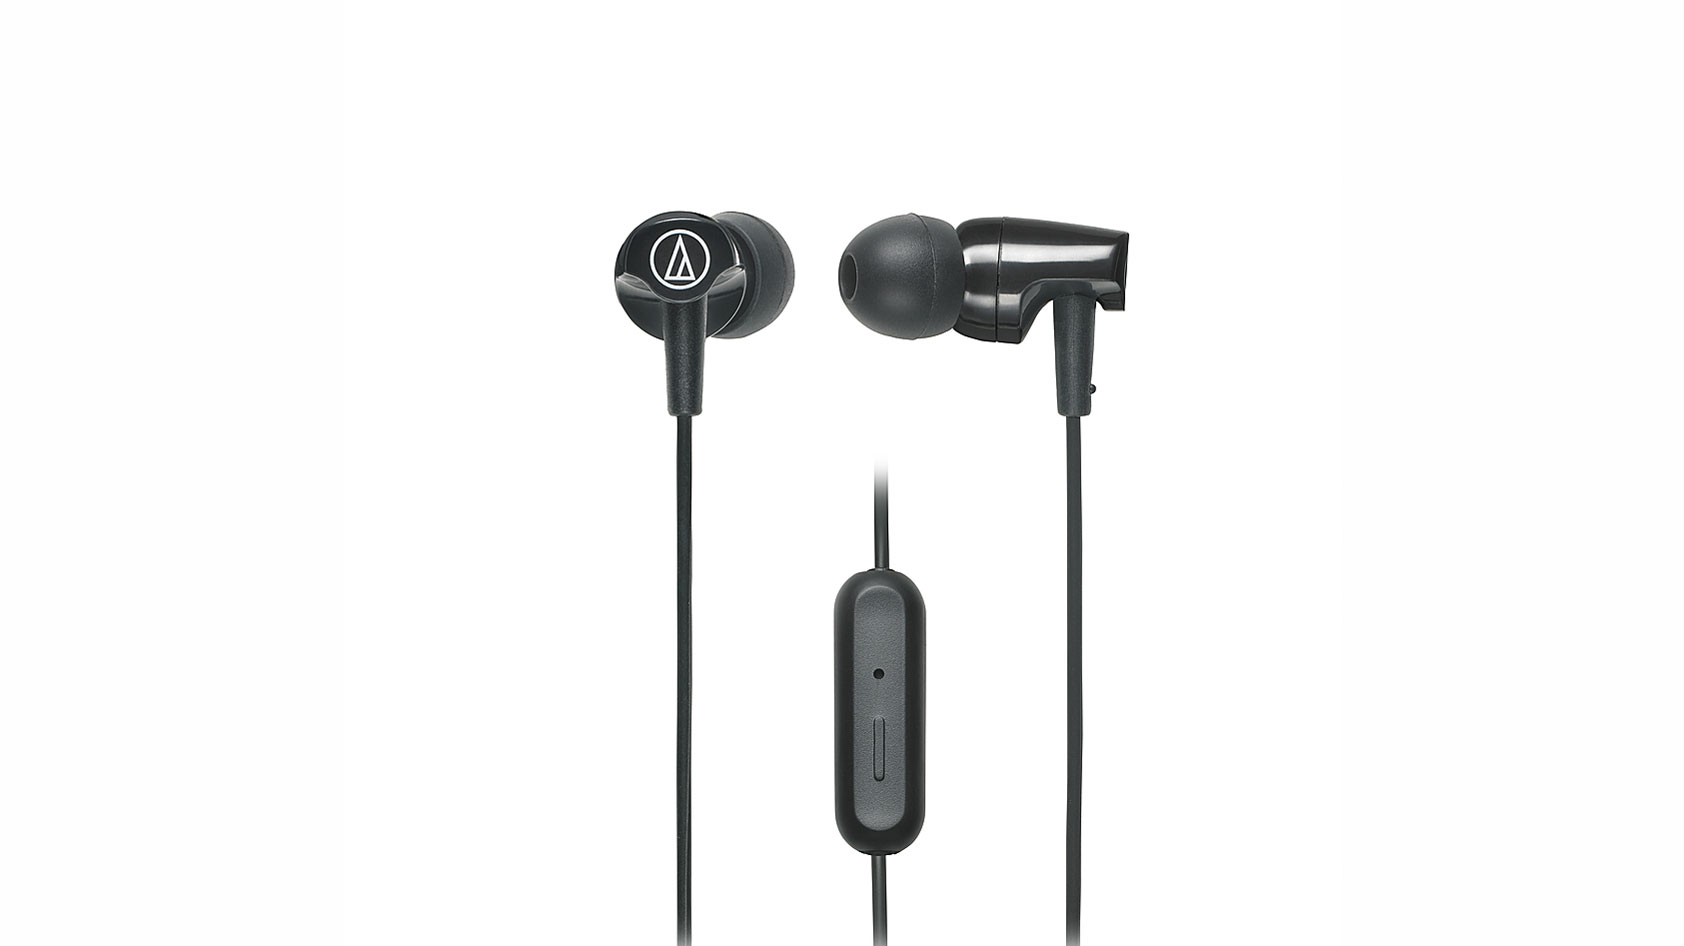 The Audio-Technica ATH-CLR100iSBK Sonicfuel wired earbuds in black against a white background.